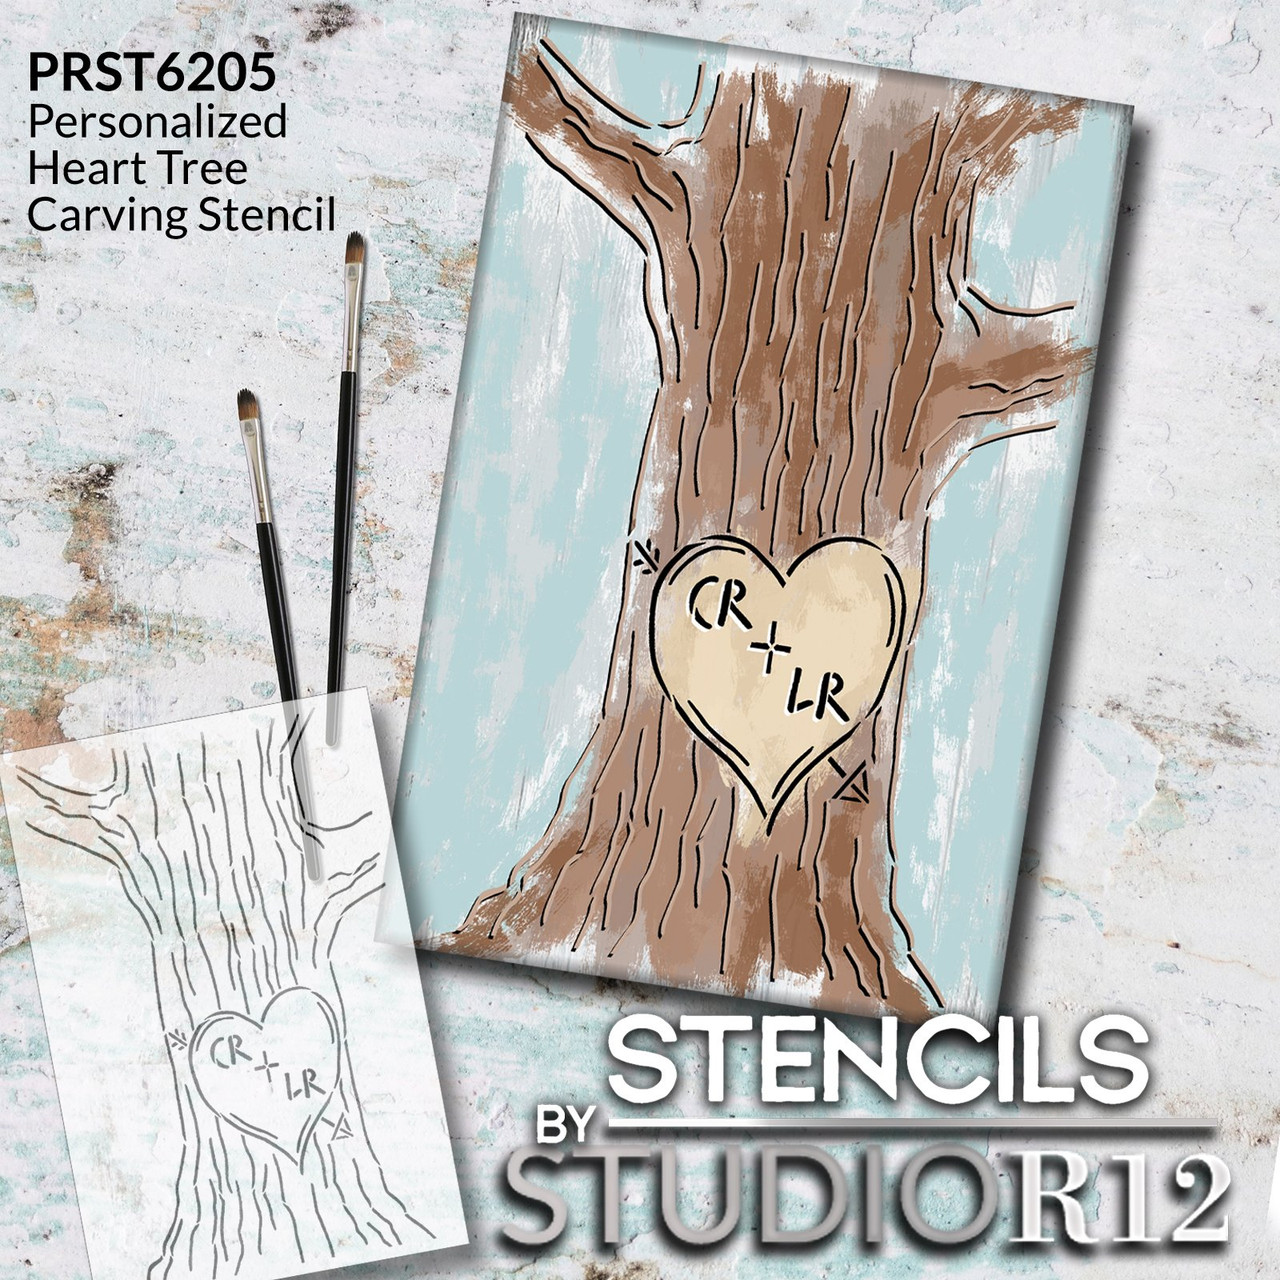 Personalized Tree Carving Stencil with Initials by StudioR12 | DIY Valentine's Day Decor | Craft Wedding Wood Signs | Select Size